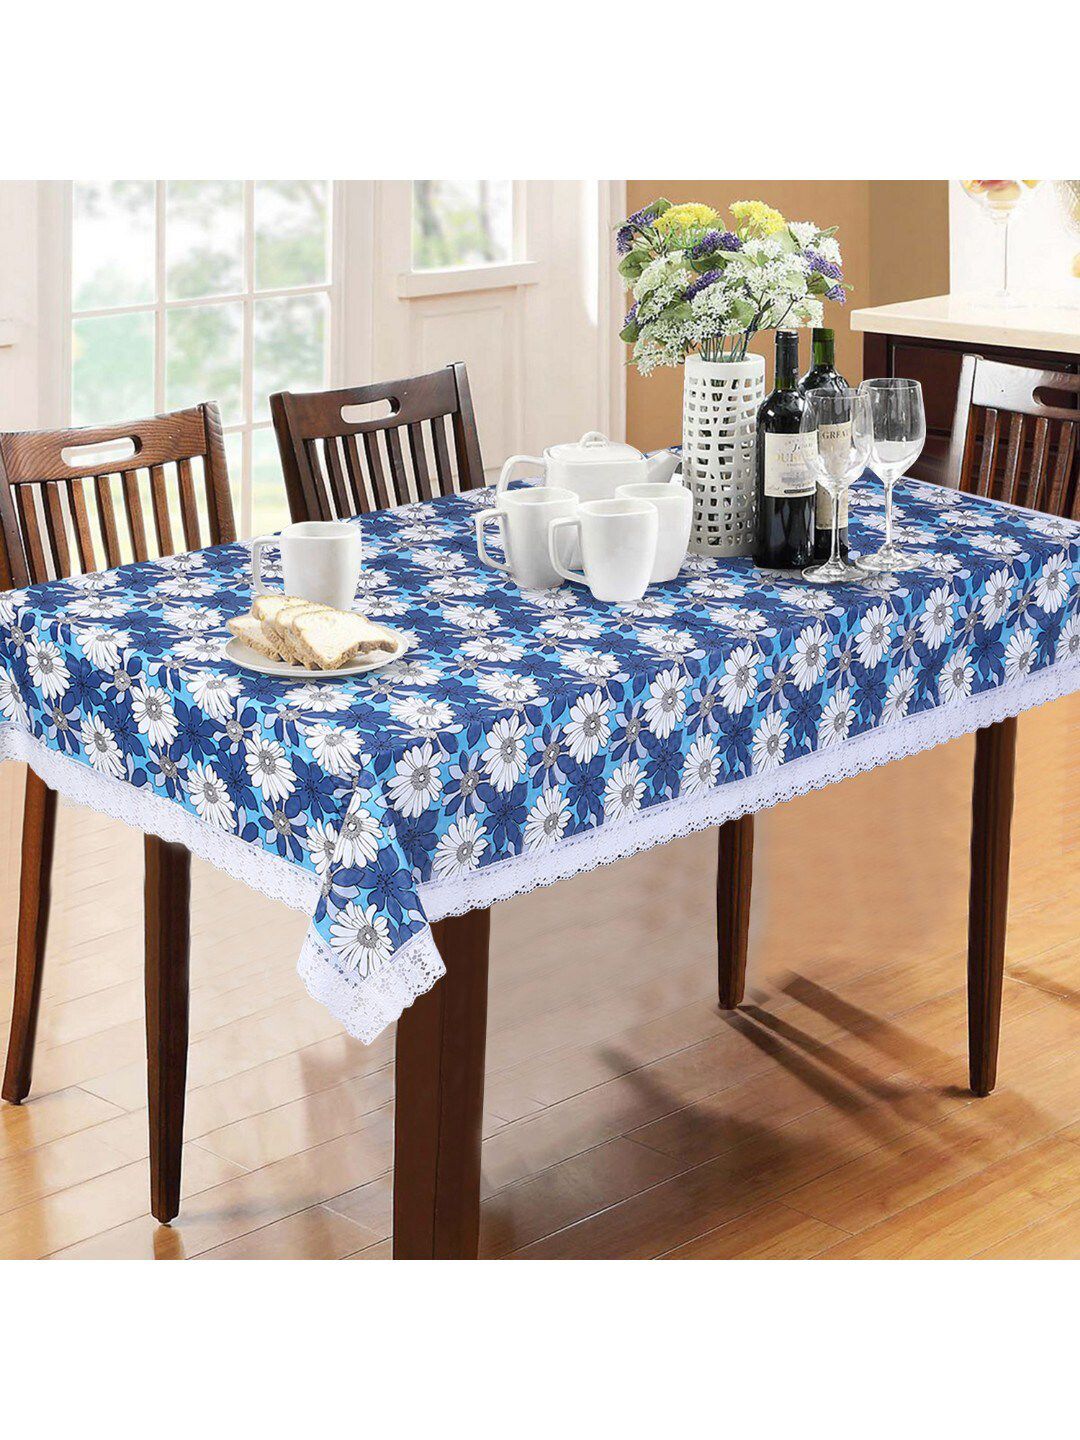 Dakshya Industries Blue Floral Printed 6 Seater Table Covers Price in India